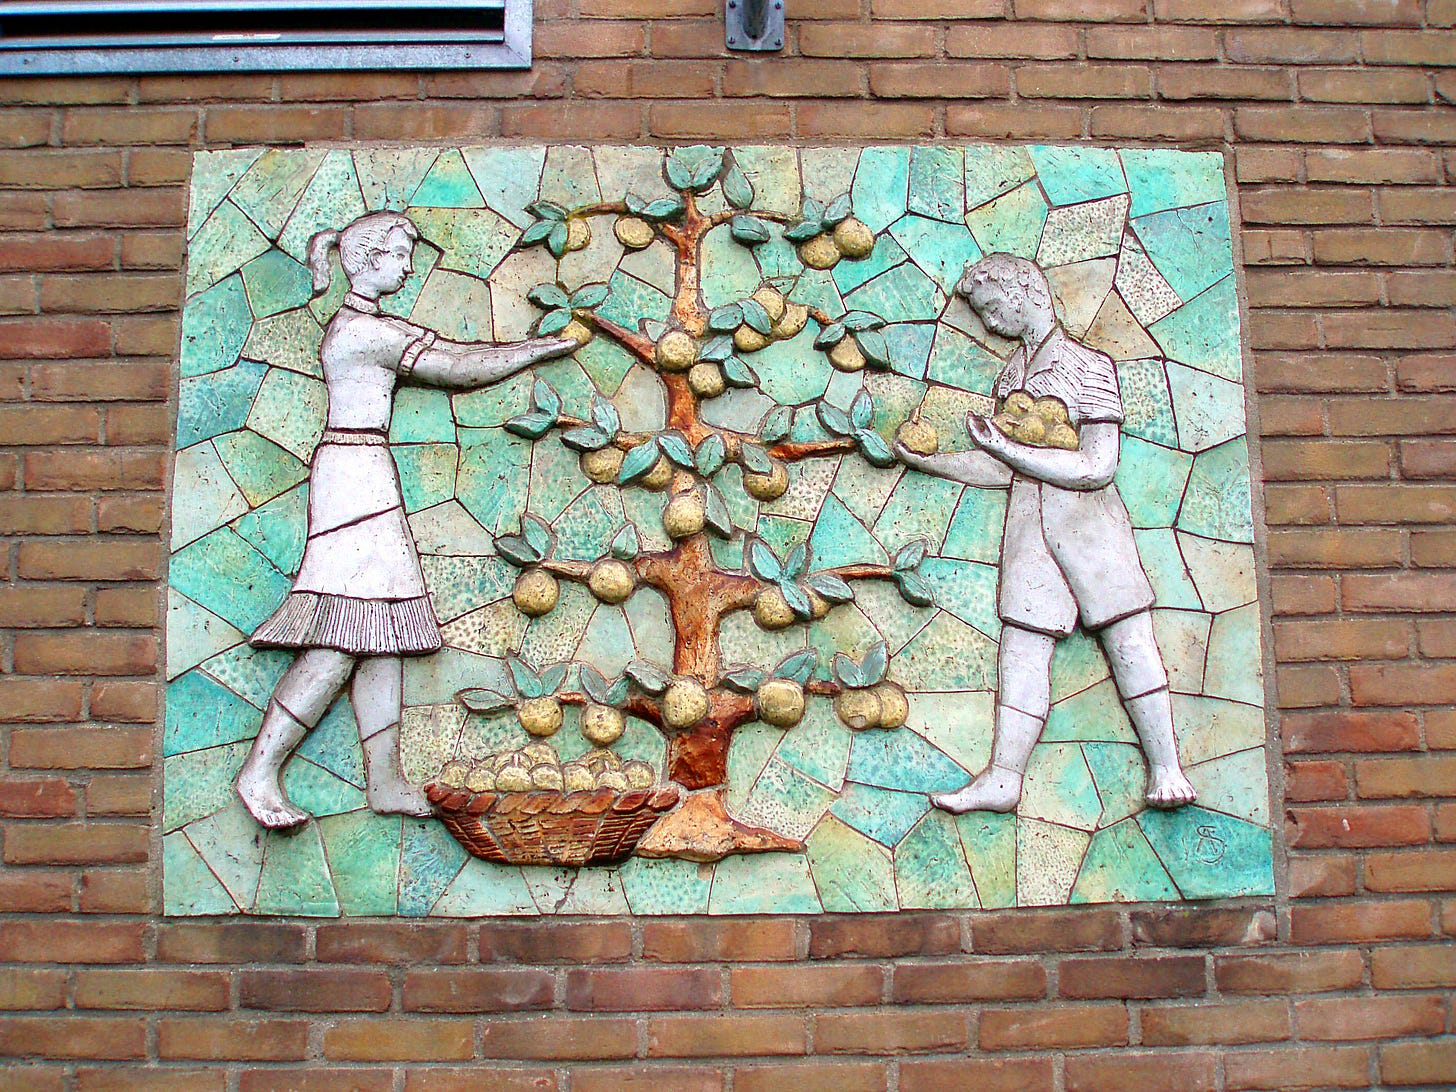 Wall mosaic showing two people harvesting apples with description Nederlands: Anno Smith,1956